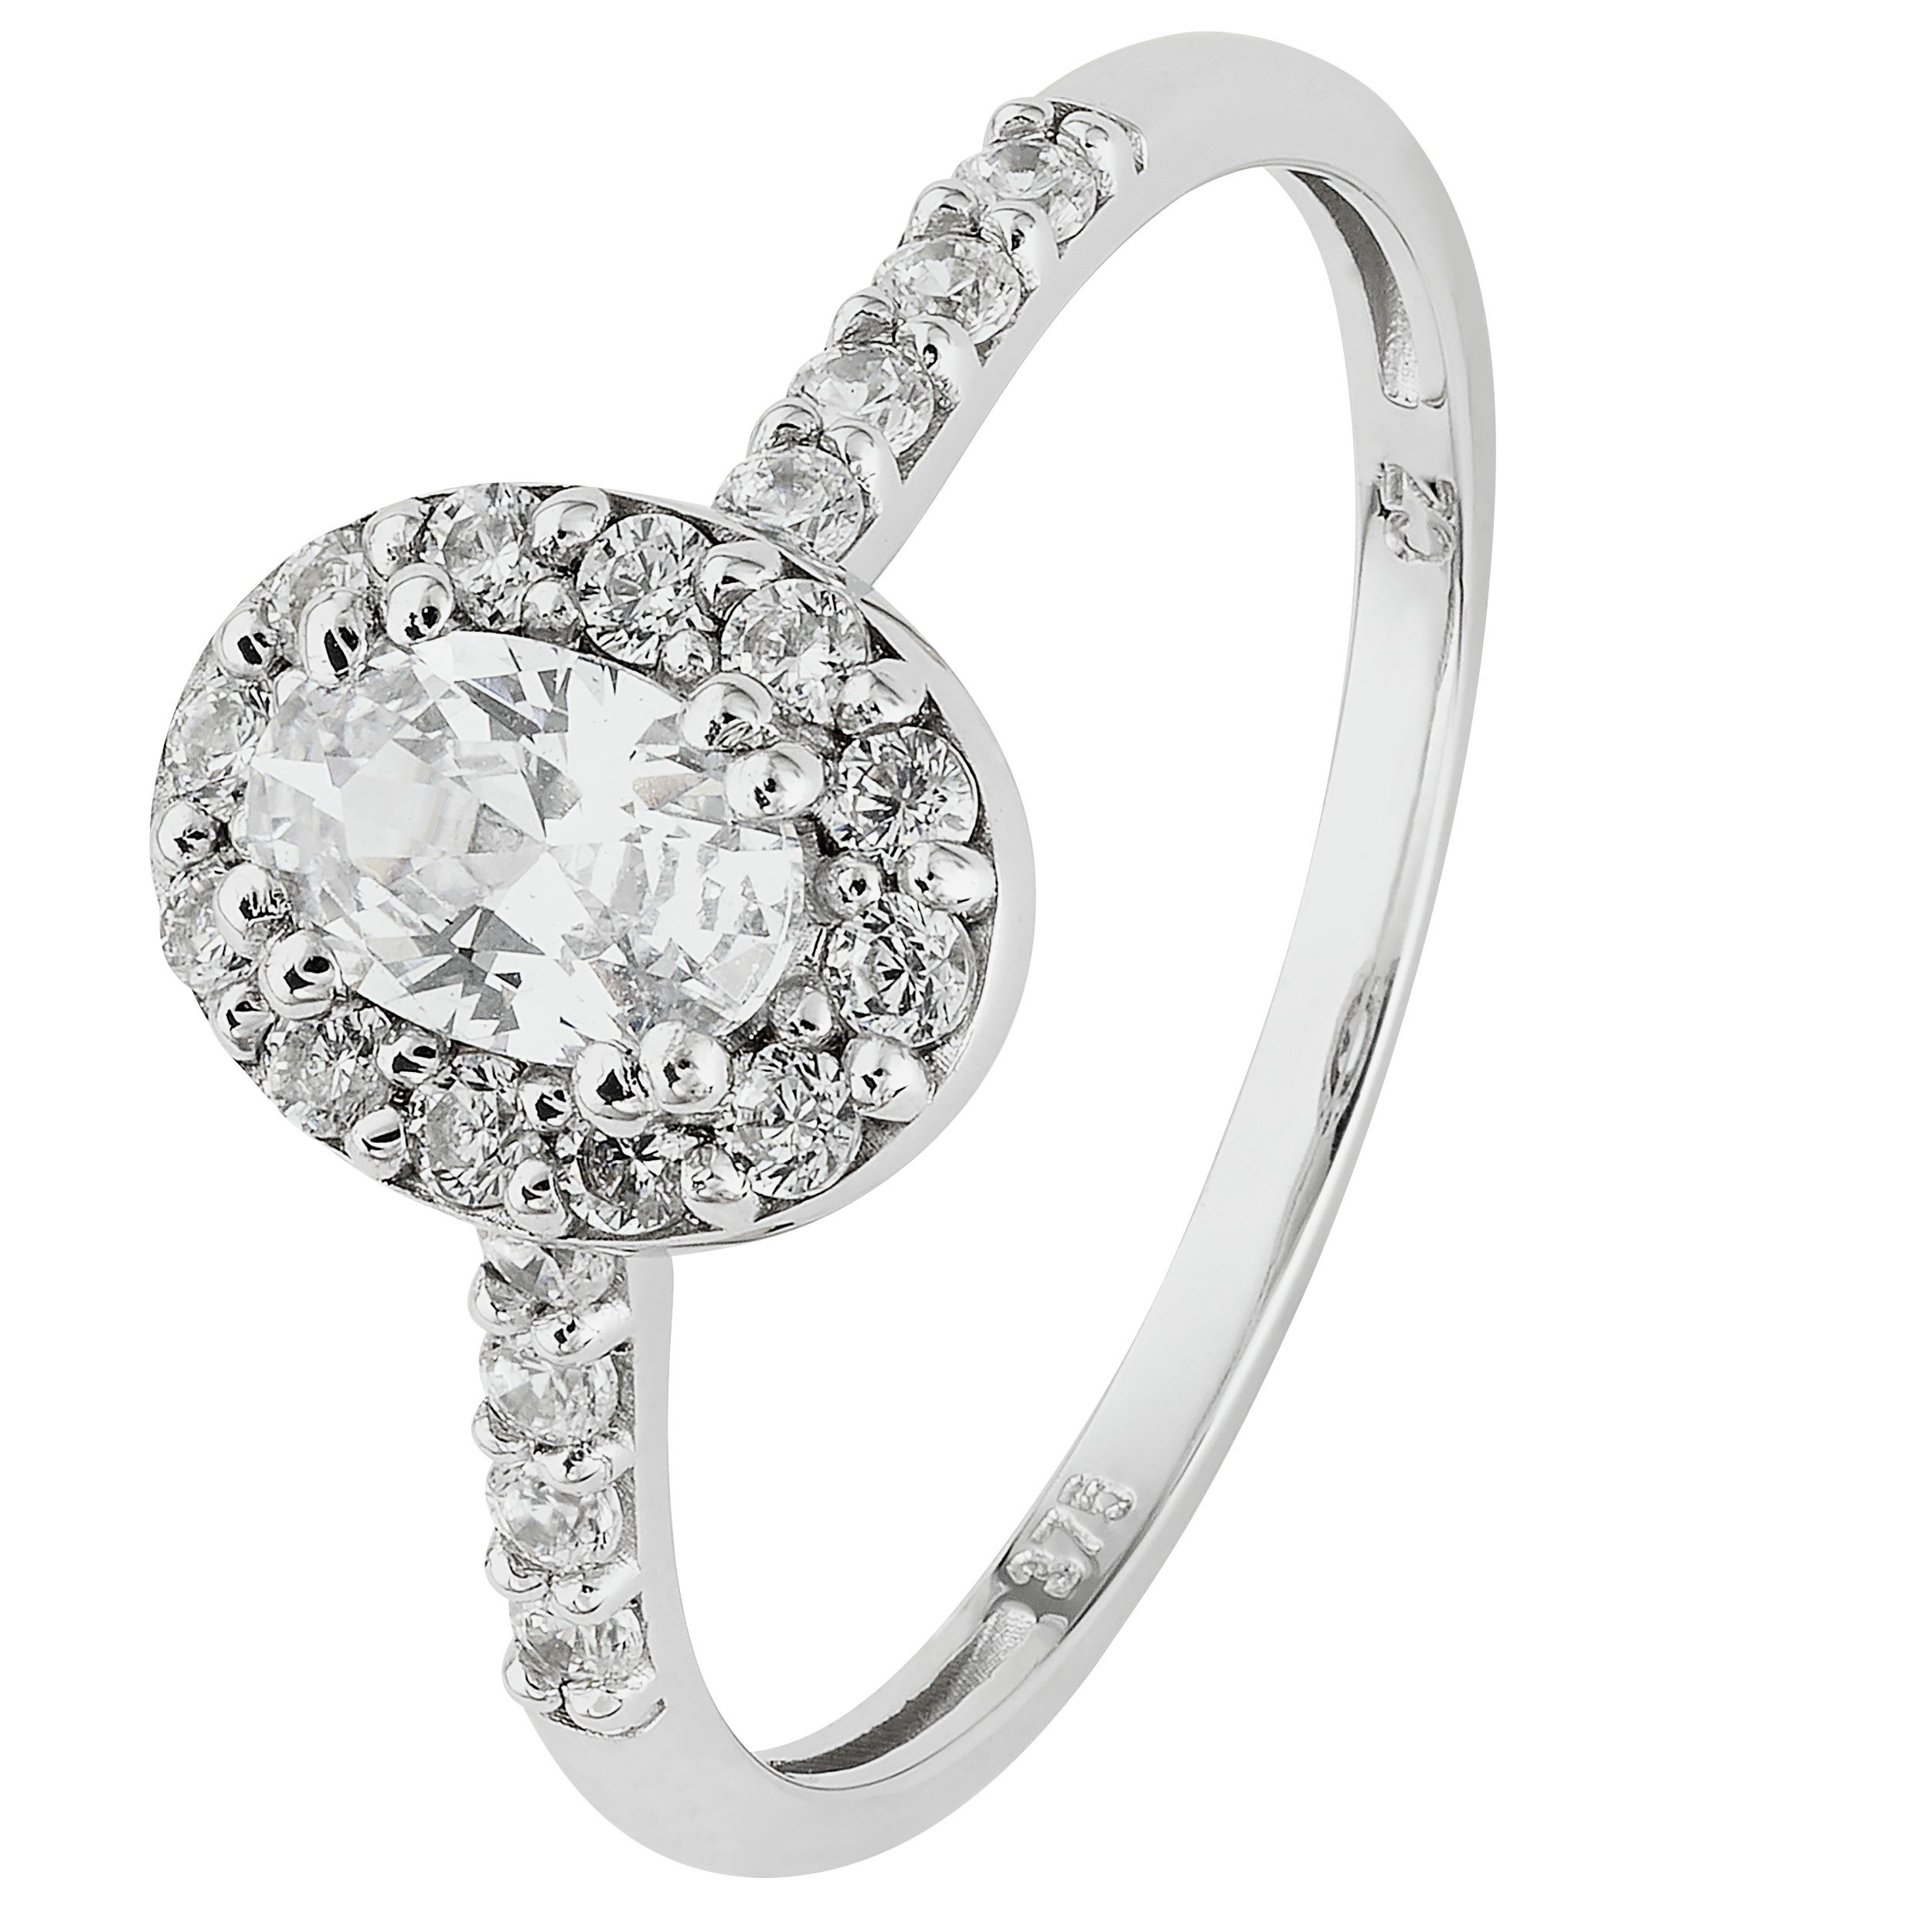 Revere 9ct White Gold Cubic Zirconia Oval Halo Ring